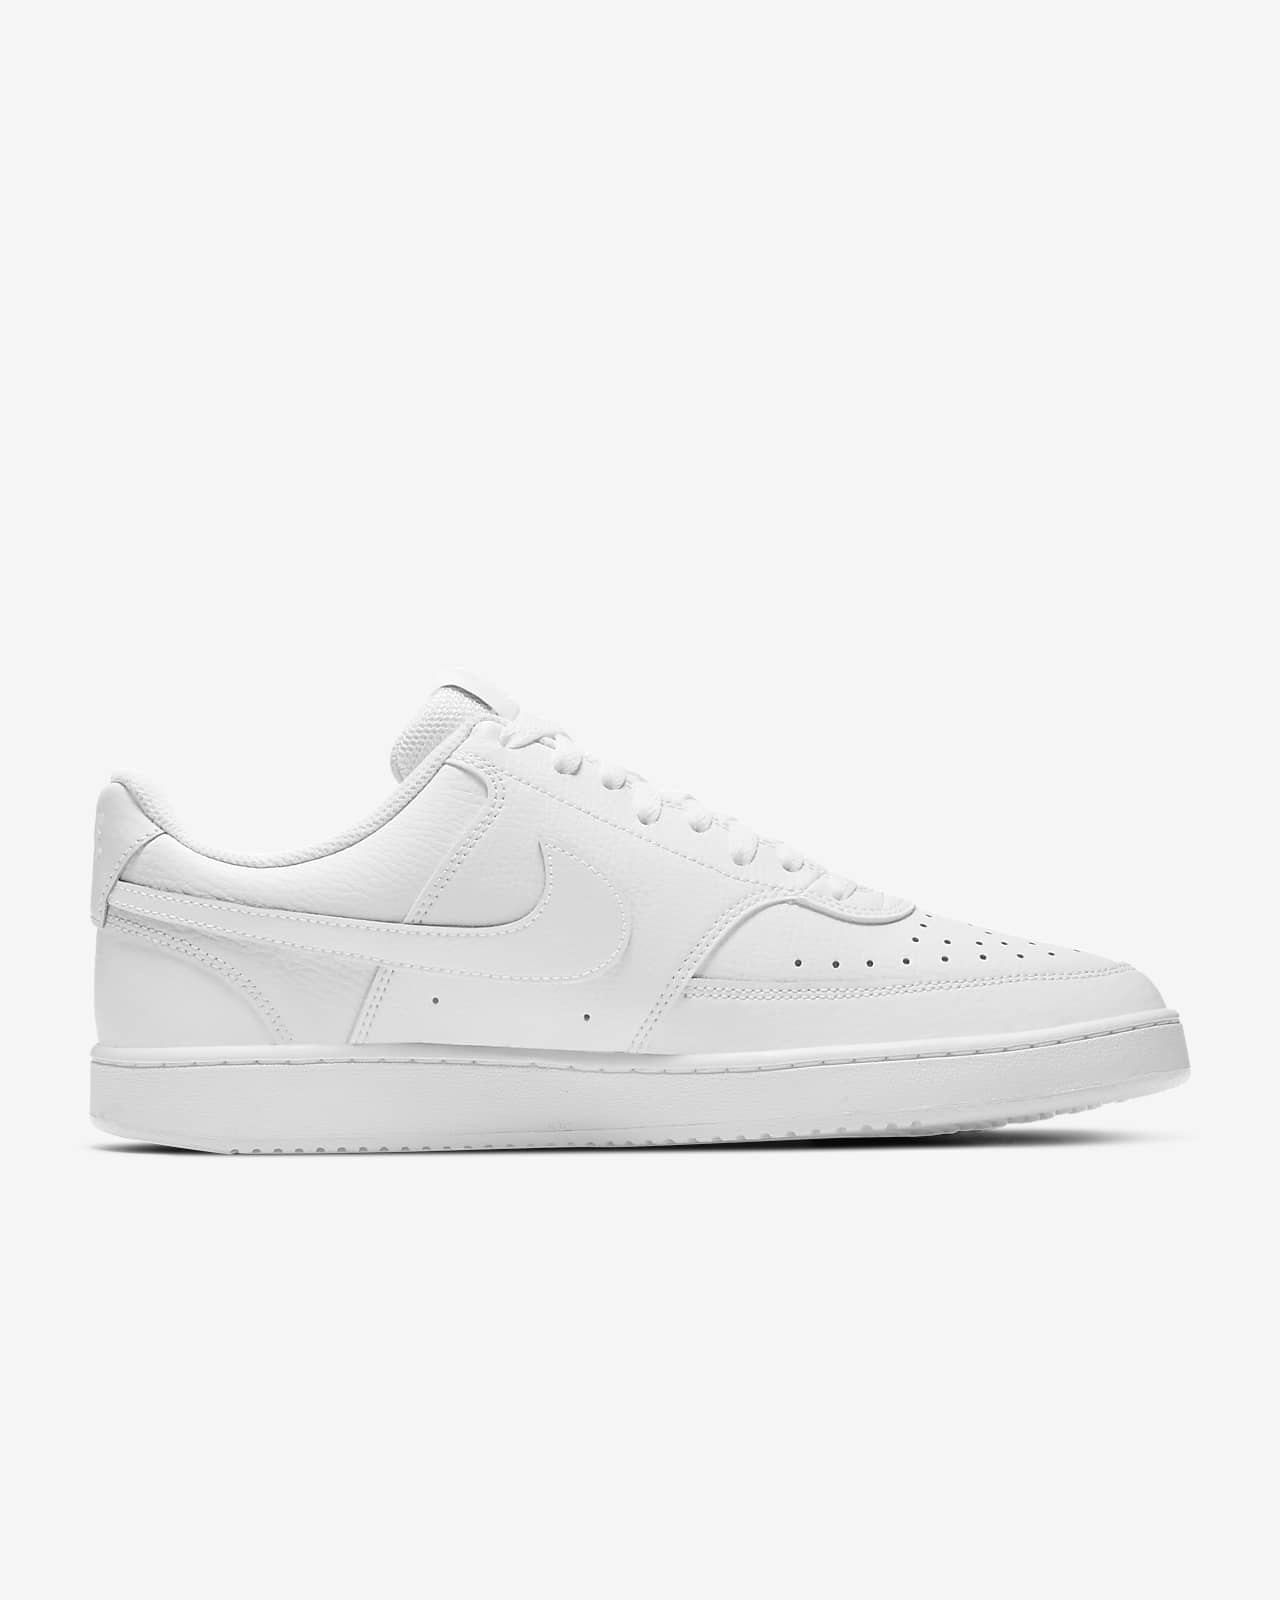 nike low court vision shoes